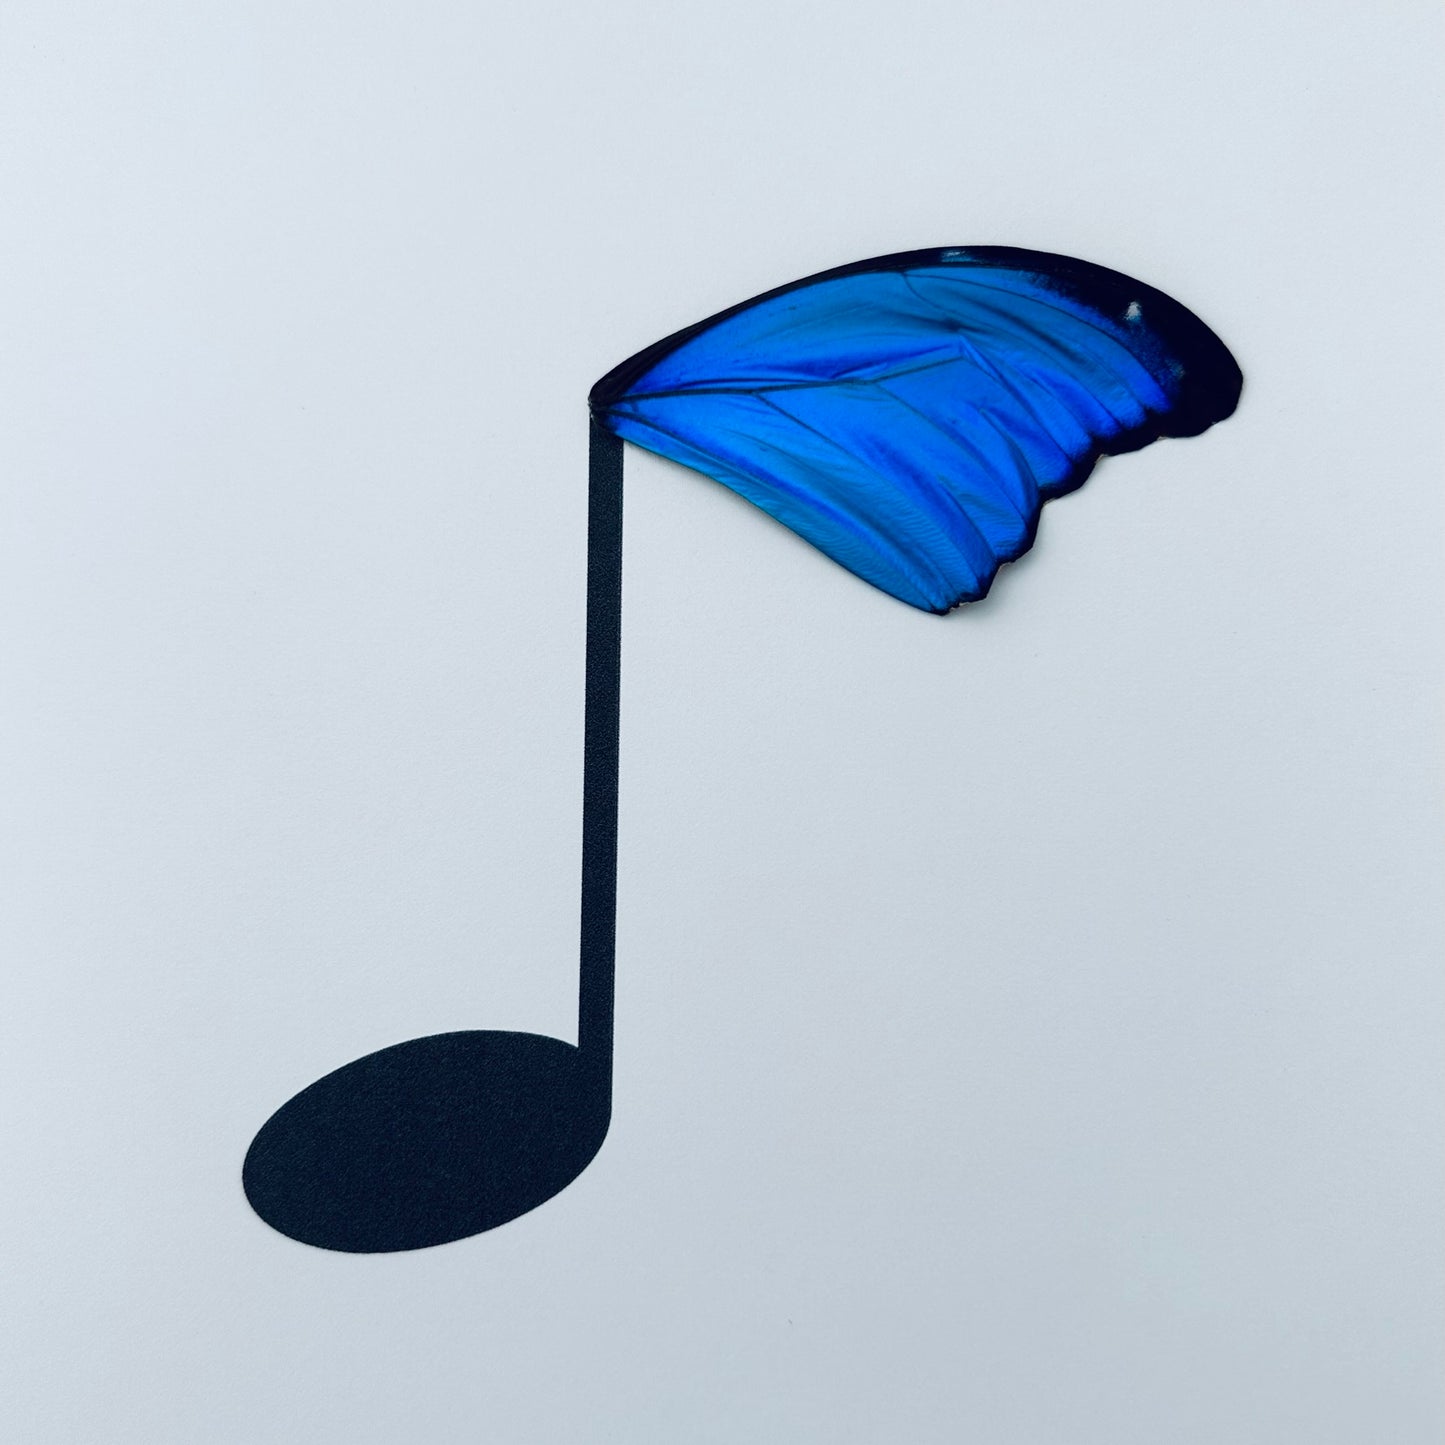 Music Quarter Note Real Butterfly Wing Framed Wall Shelf Art Ethically Sourced Made in MN USA - Holly Ulm - Isms Butterfly Conservation Art